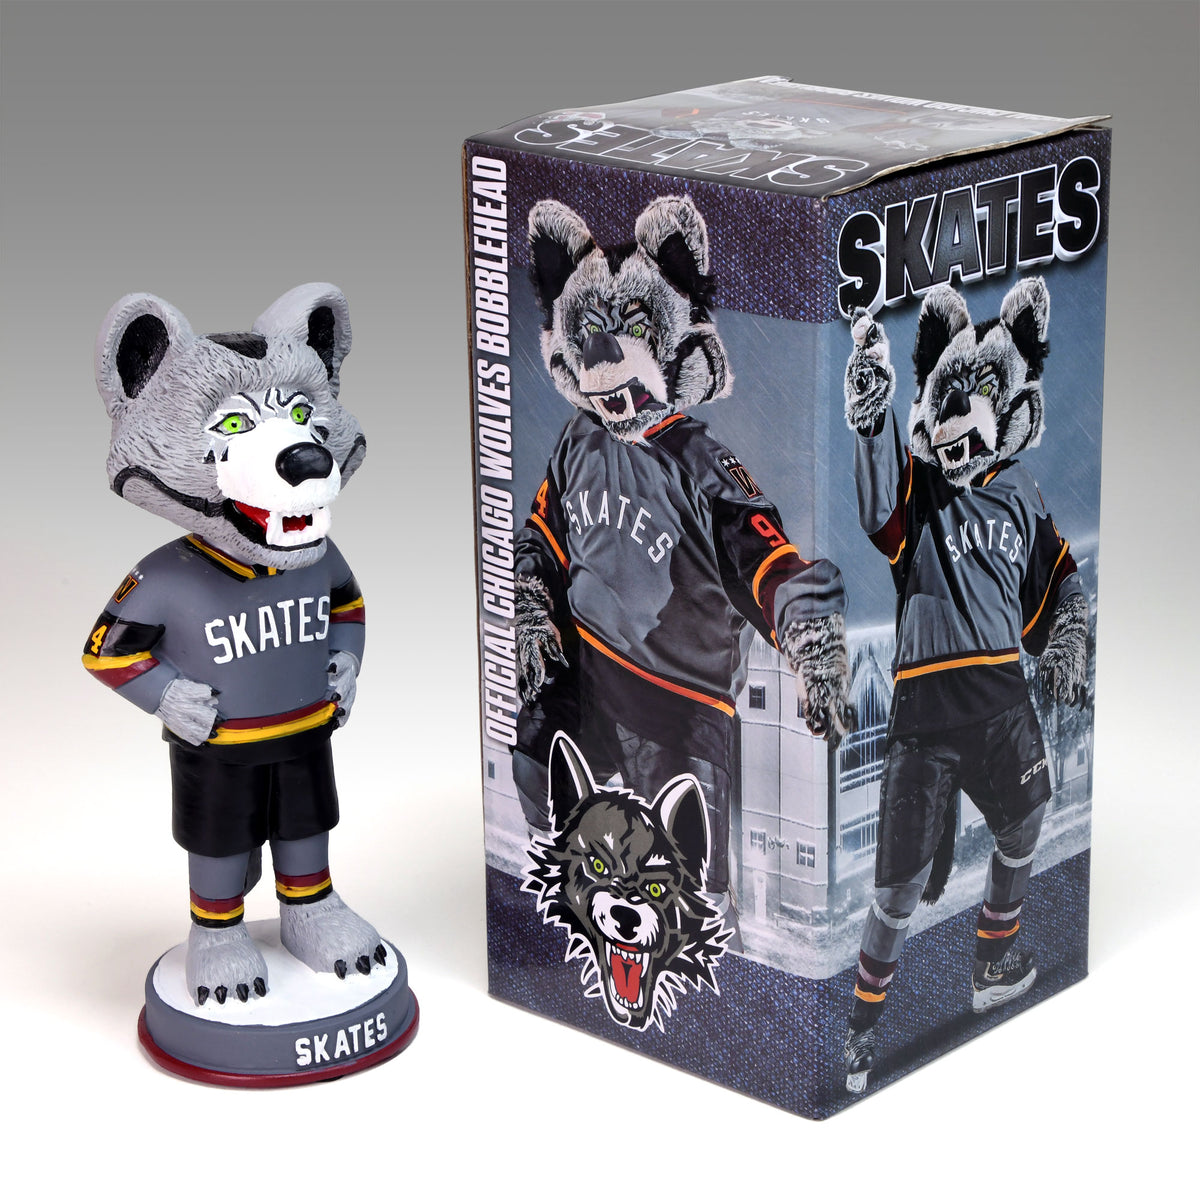 Team Store Bobbleheads and Plush